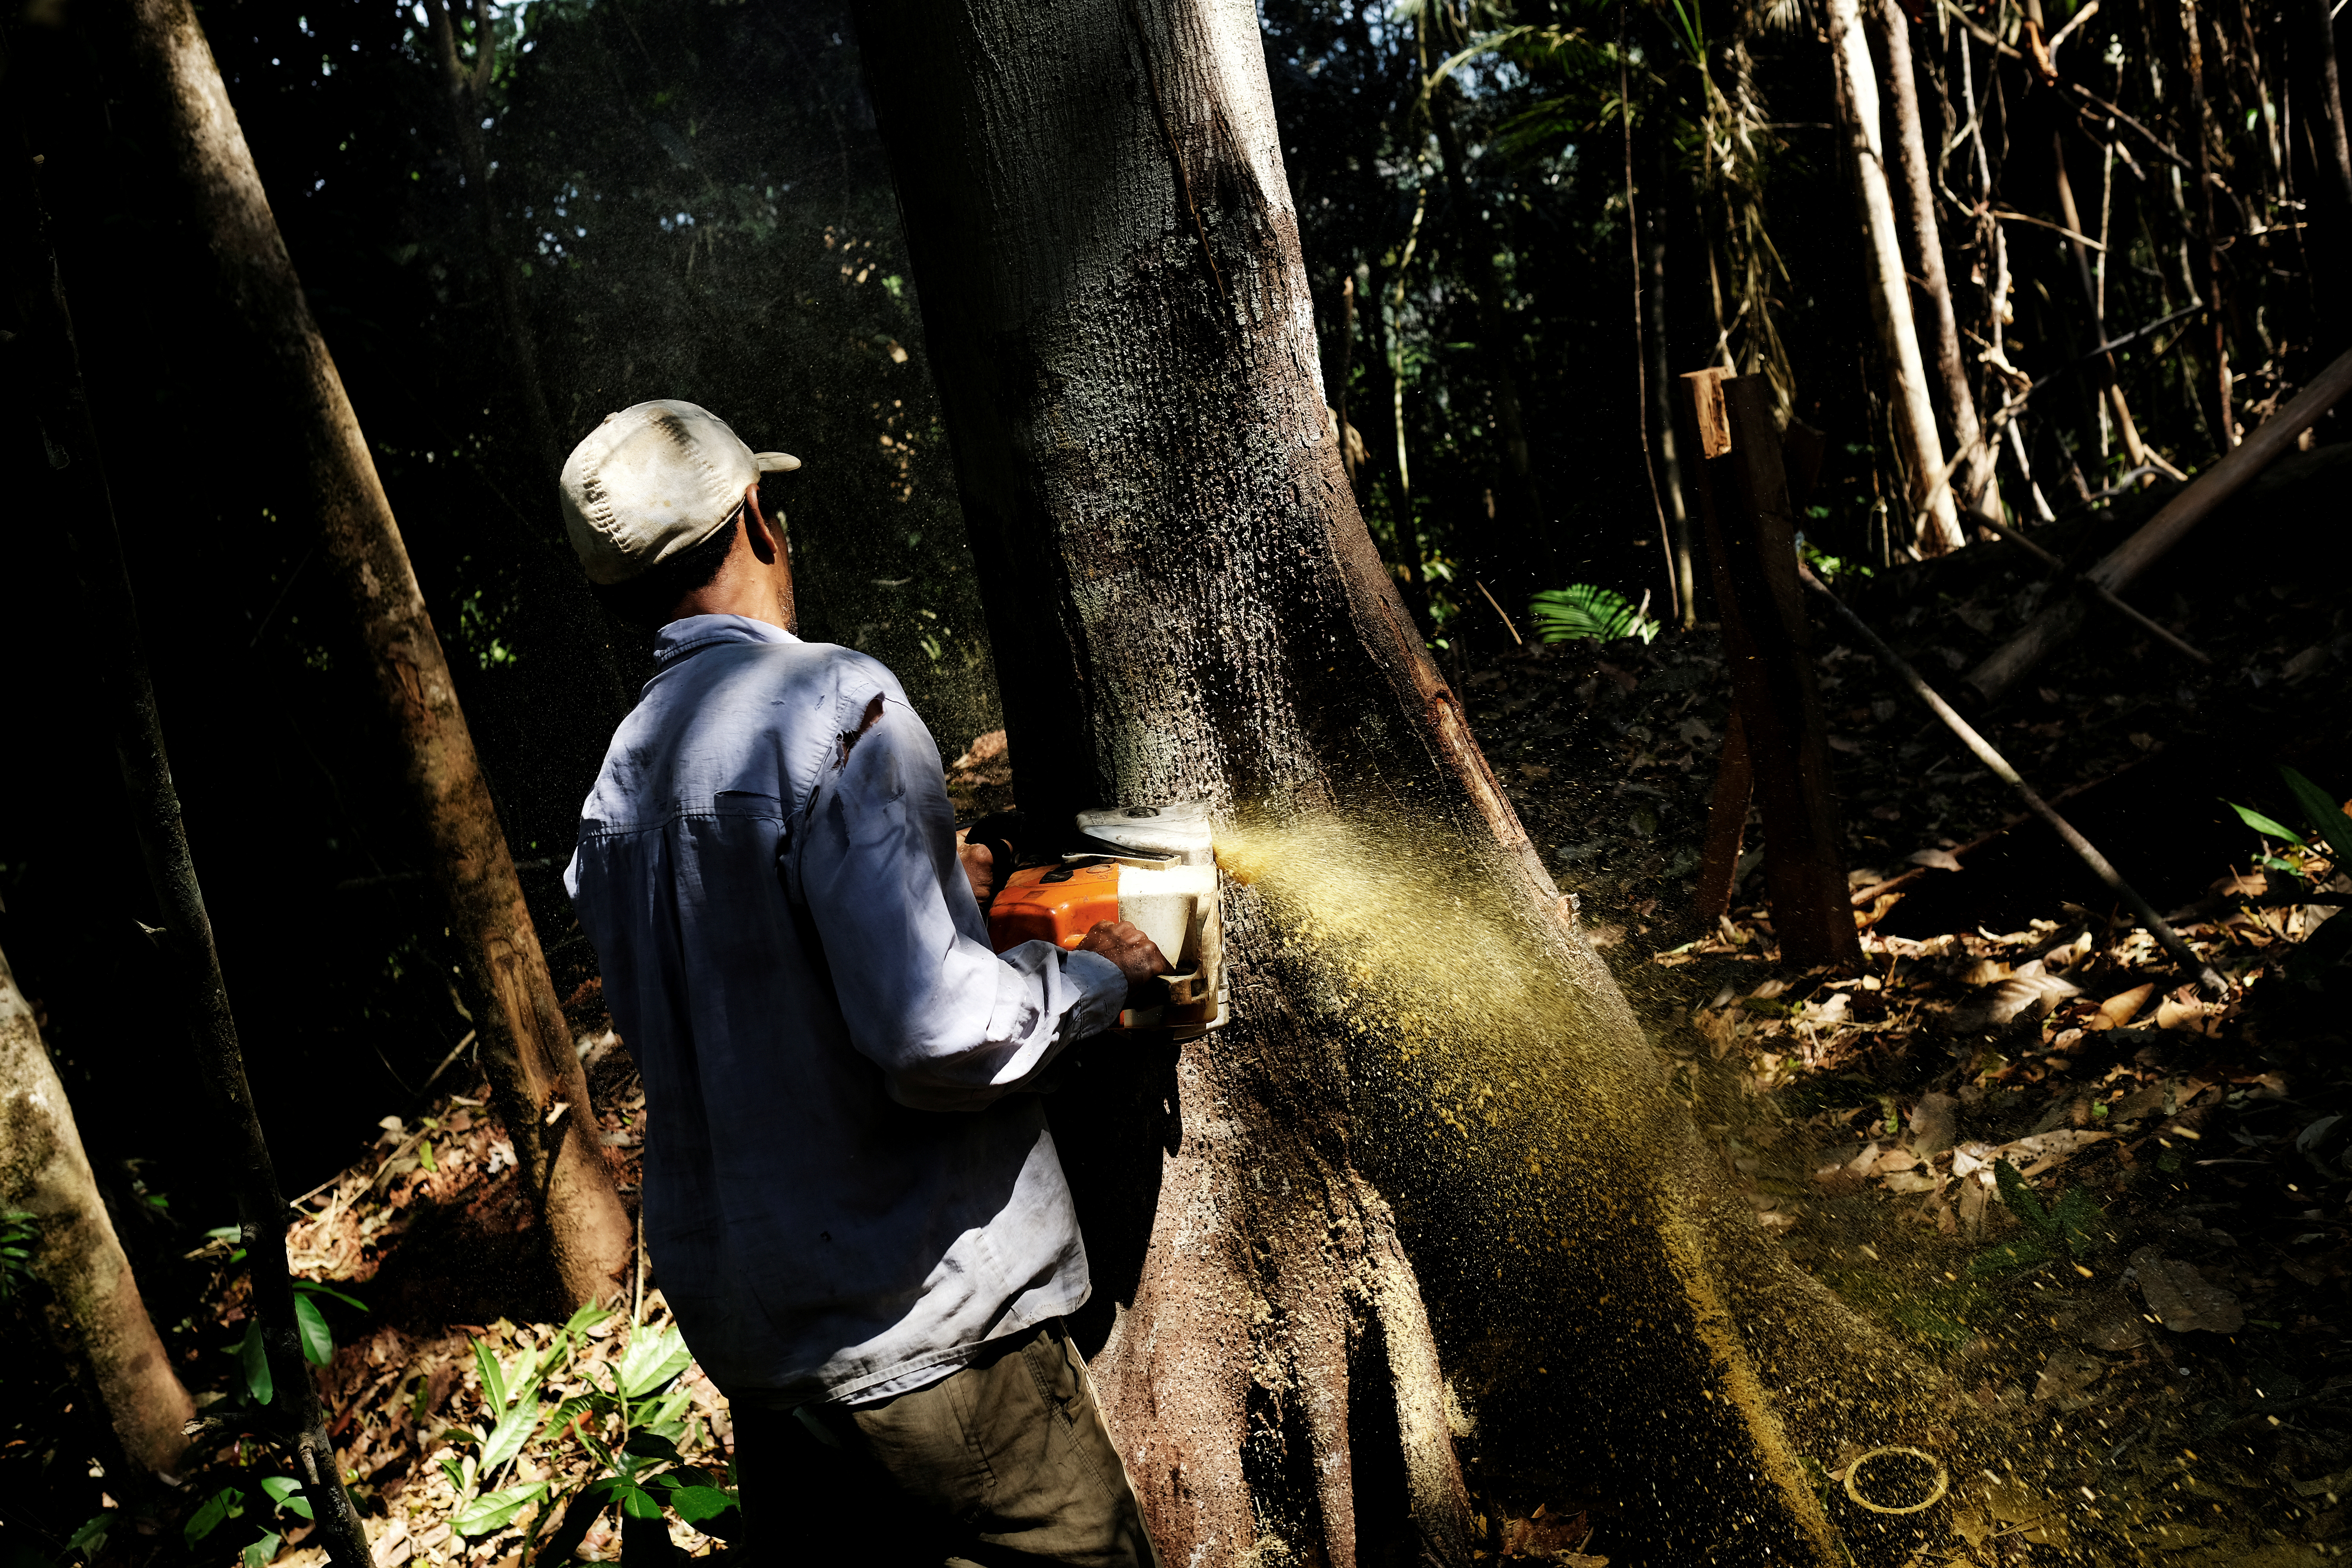 Man cuts down a tree with a chainsaw in a forest in the municipality of Itaituba